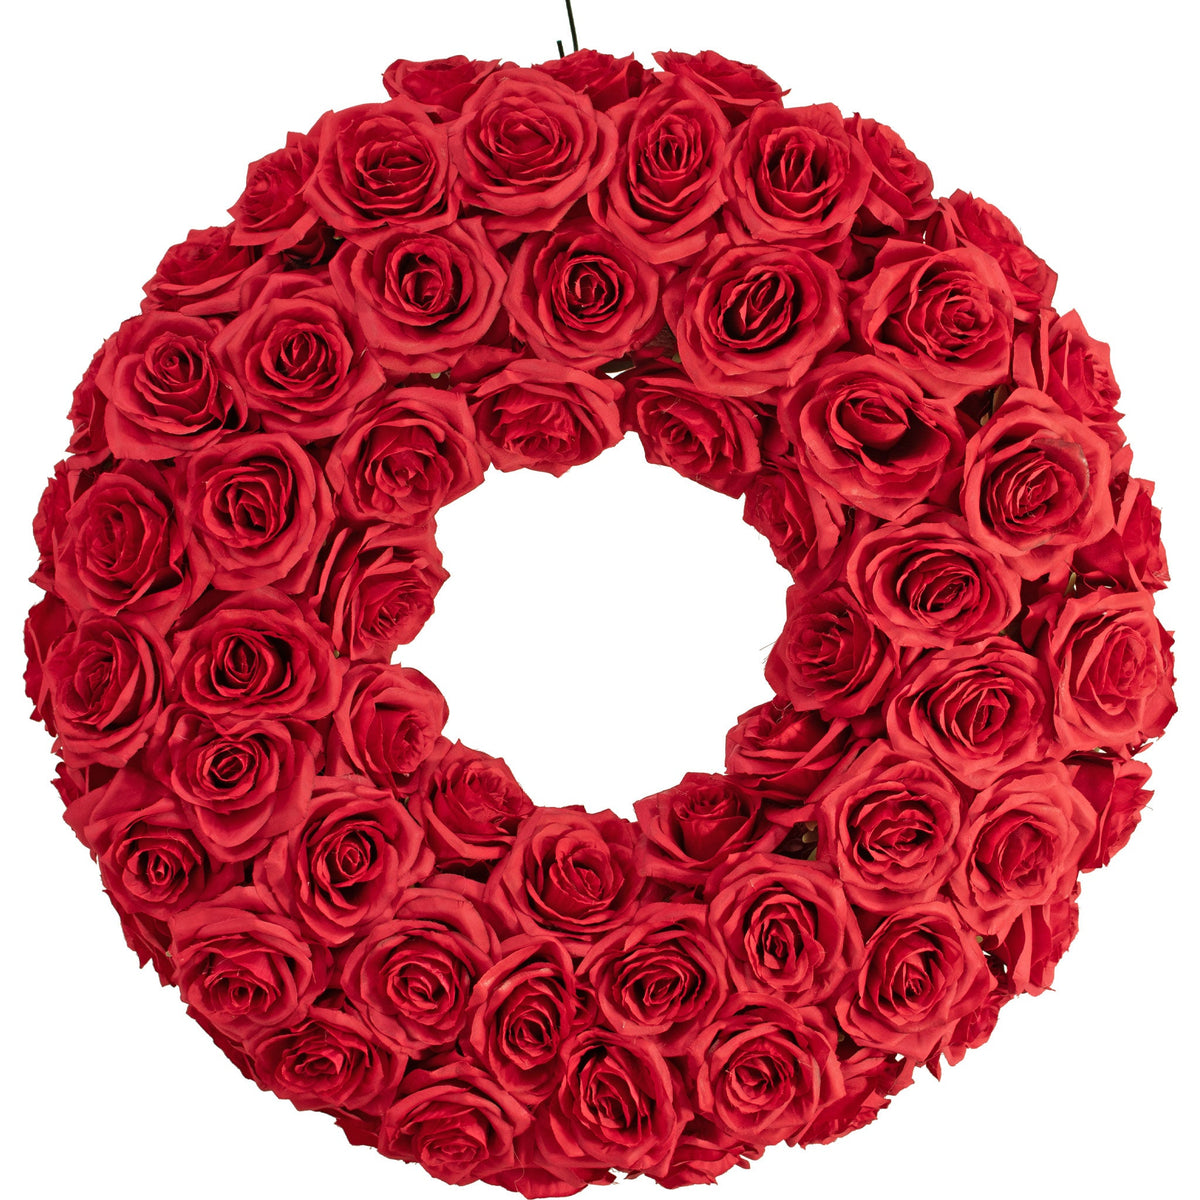 A photo of the Red Rose Wreath hanging on a hook